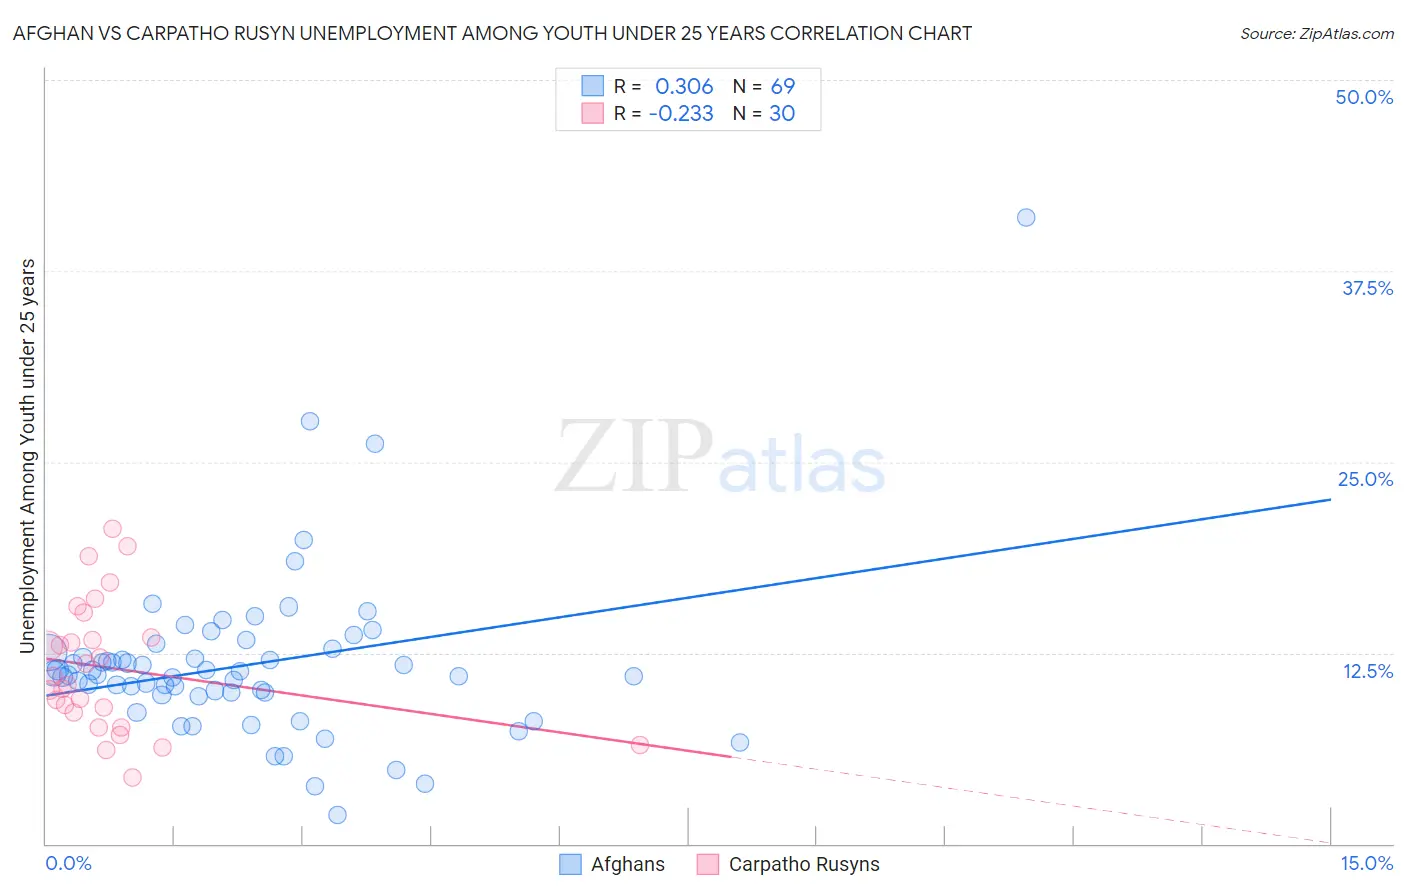 Afghan vs Carpatho Rusyn Unemployment Among Youth under 25 years